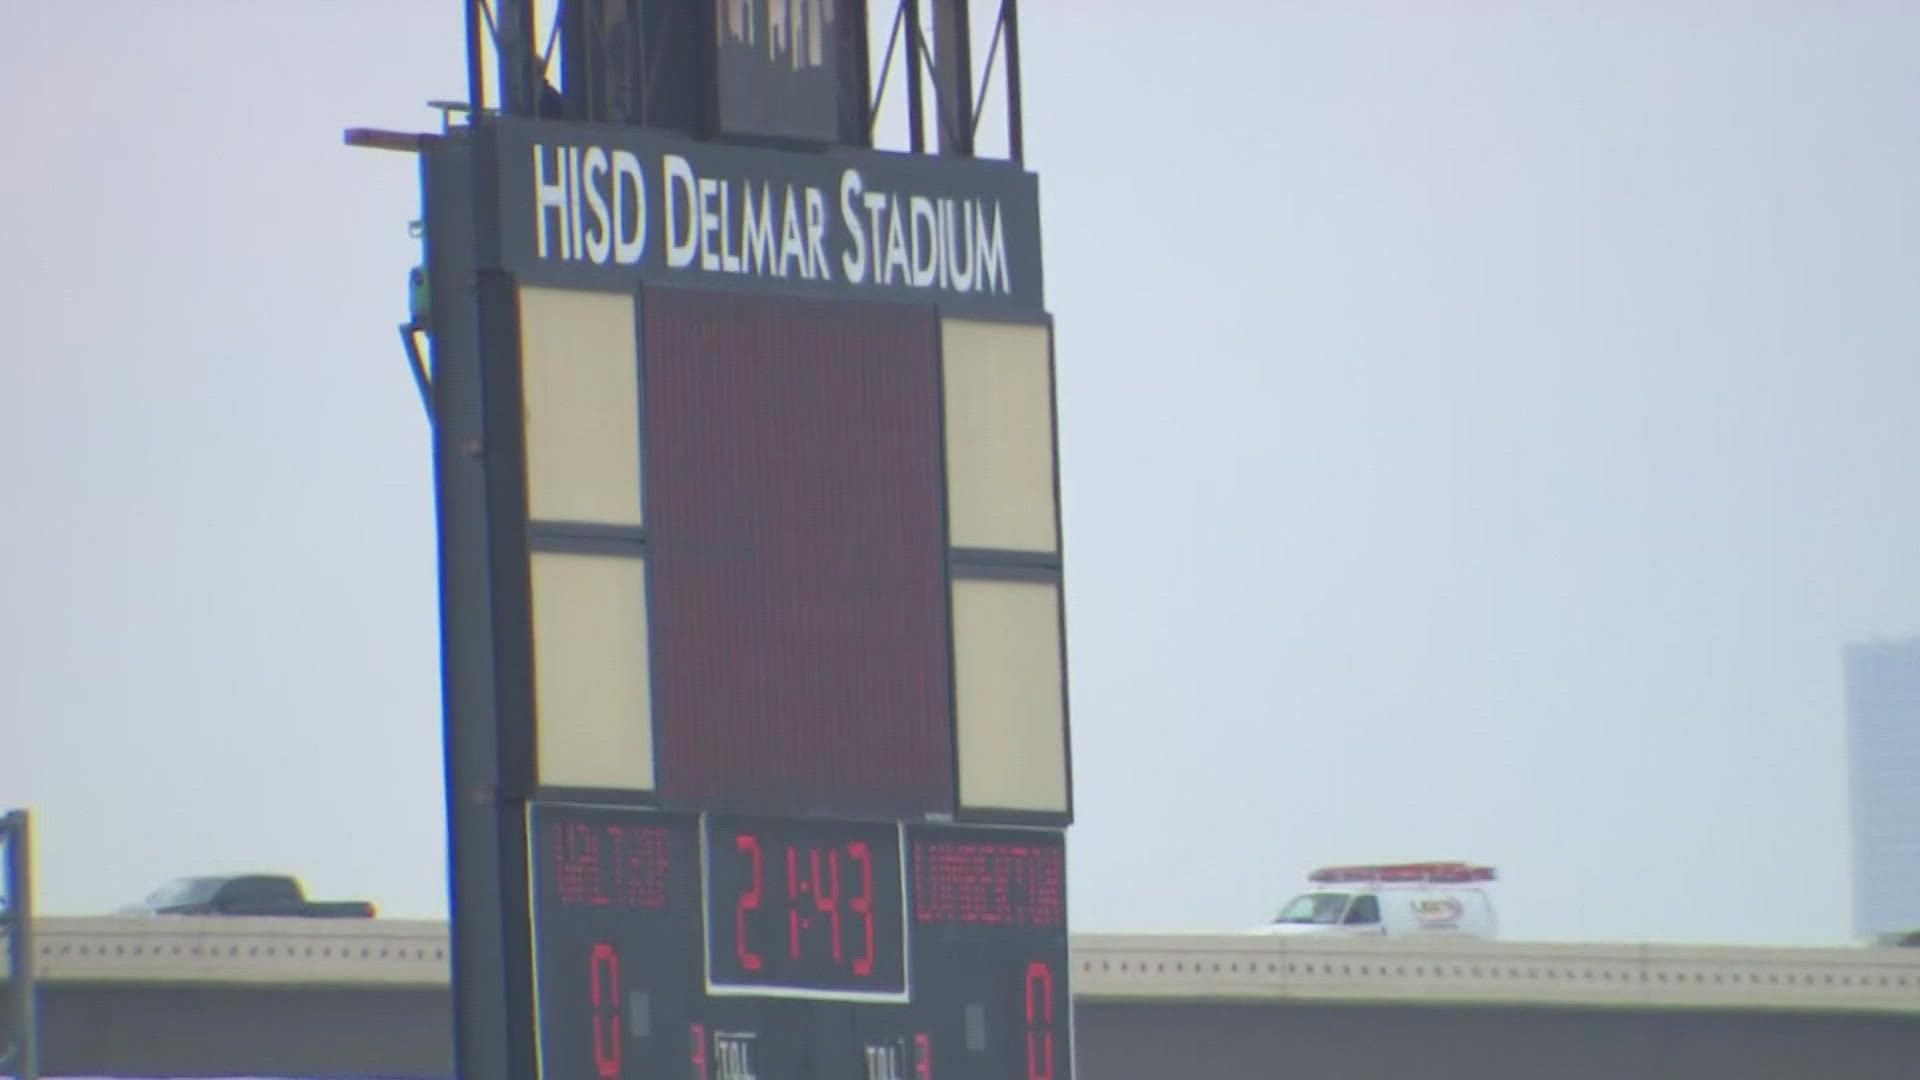 Two Houston ISD varsity football teams are currently quarantined due to COVID-19.